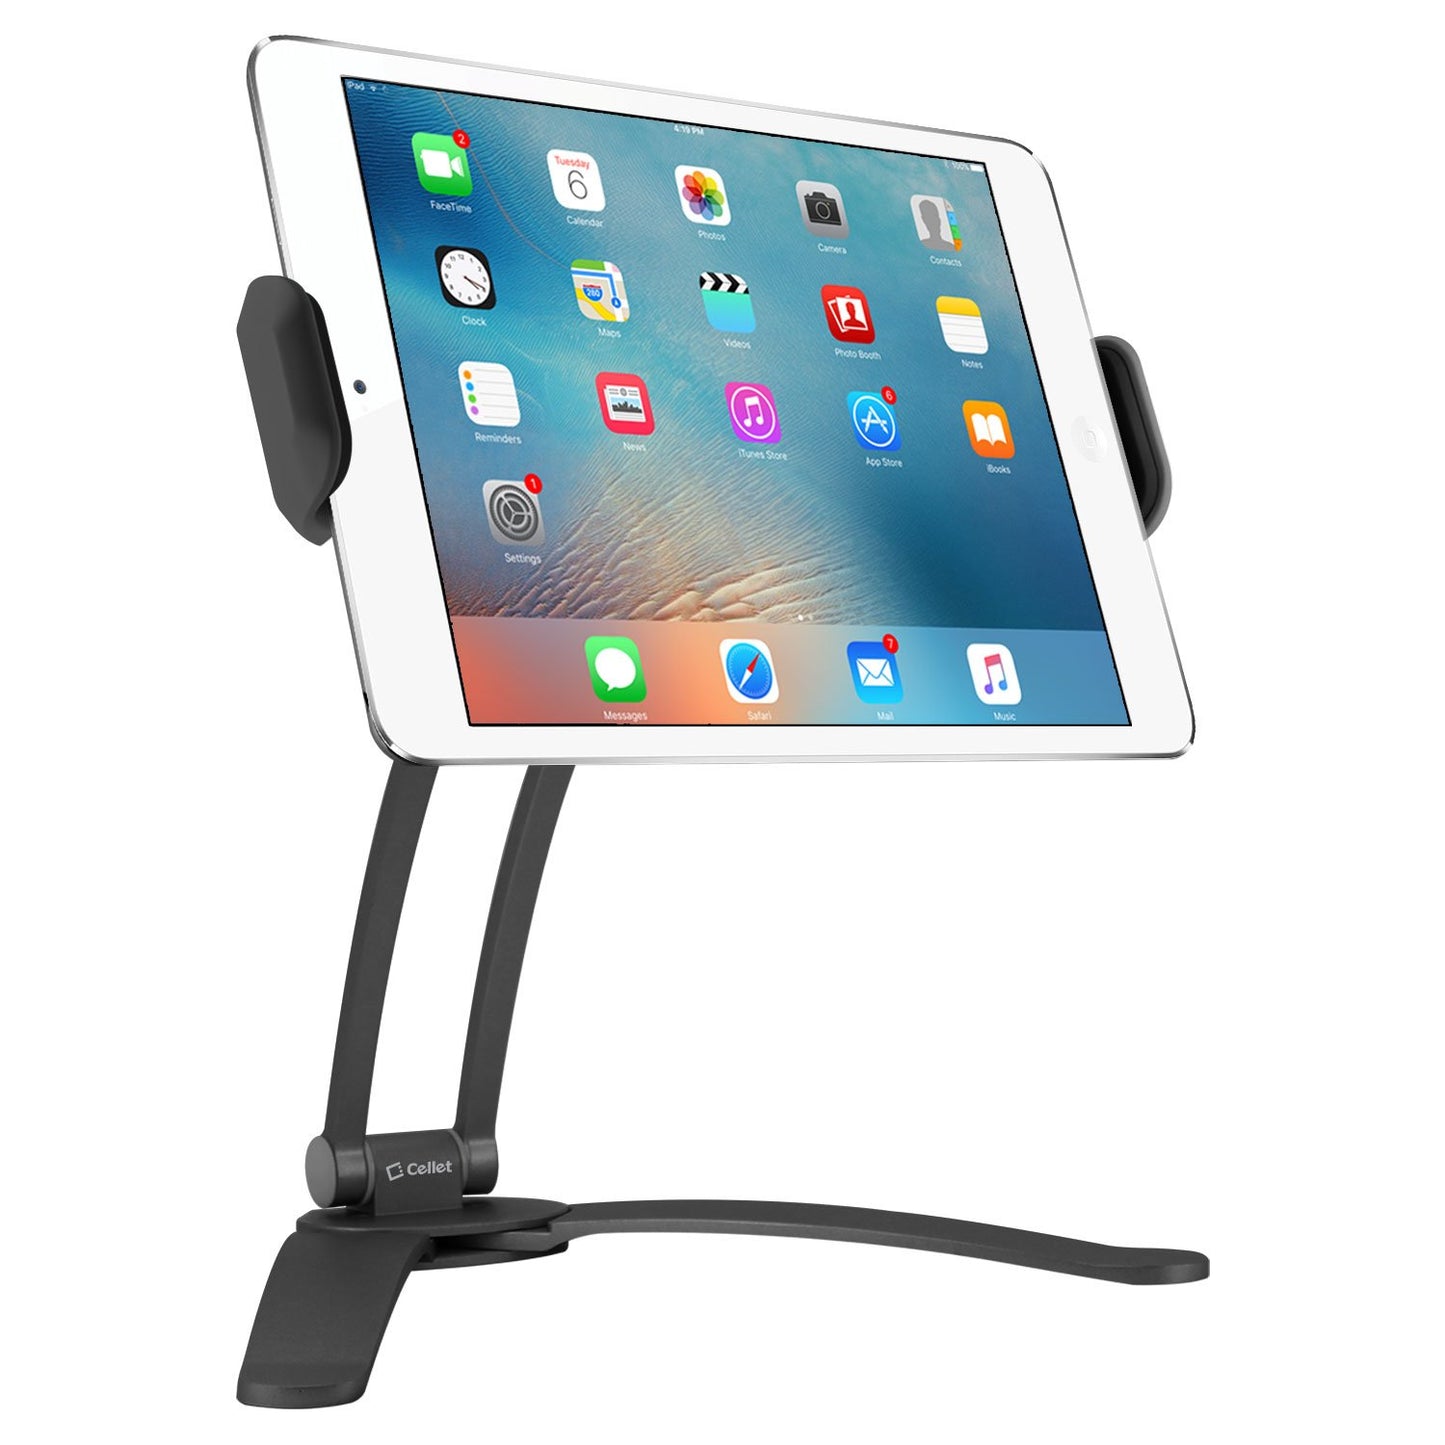 PHTAB43CNBK - Desktop and Wall Holder Mount with 360 Degree Rotation for Apple iPad Pro 10.5, Pro 9.7, Samsung Galaxy Tab S3 and More - Black